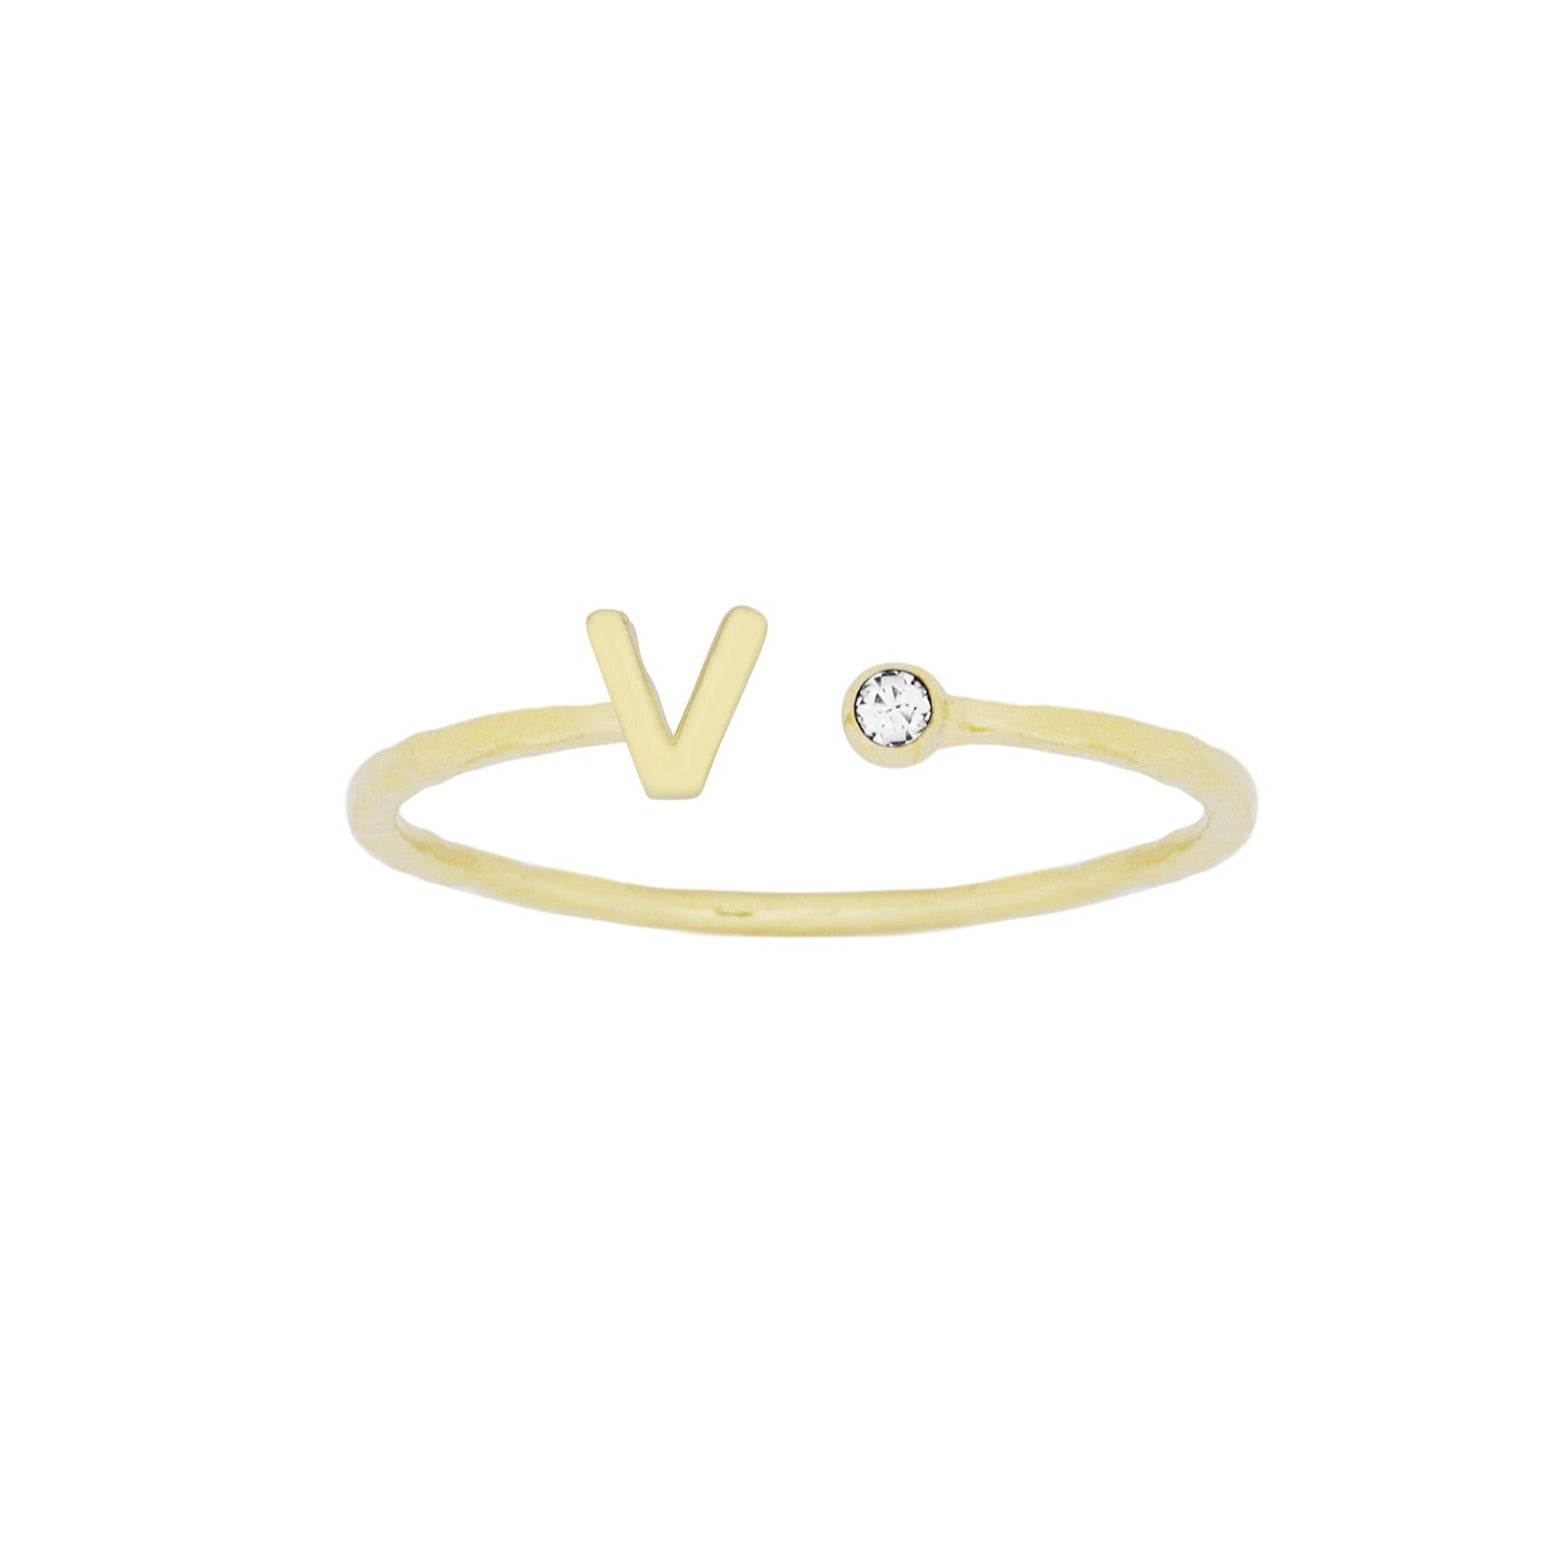 10 Piece Dainty Gold Ring Set, Simple Gold Rings, Delicate Gold